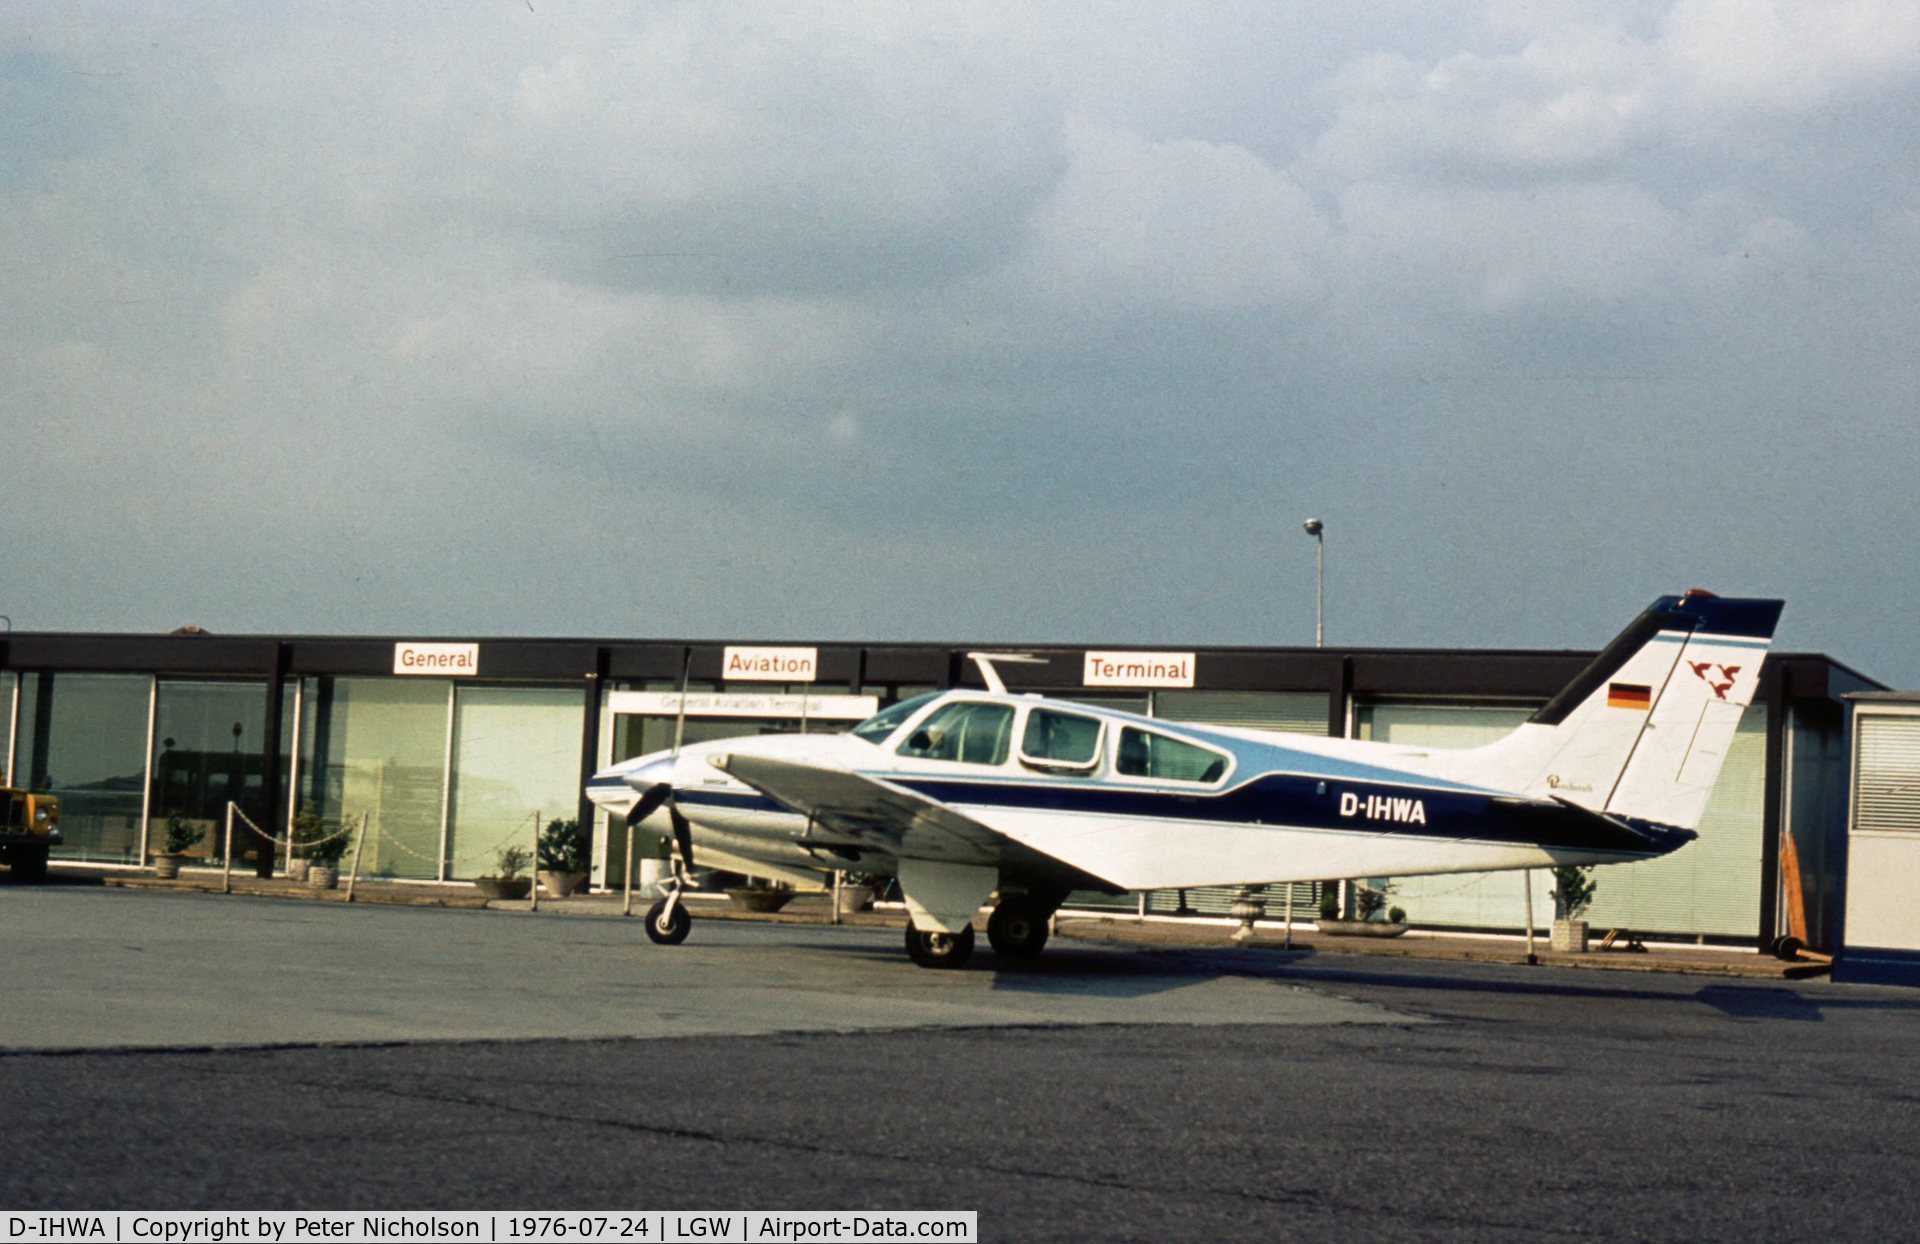 D-IHWA, 1974 Beech E-55 Baron Baron C/N TE-925, This Baron seen at London Gatwick in the Summer of 1976 was displayed at the 1974 Hannover Air Show.